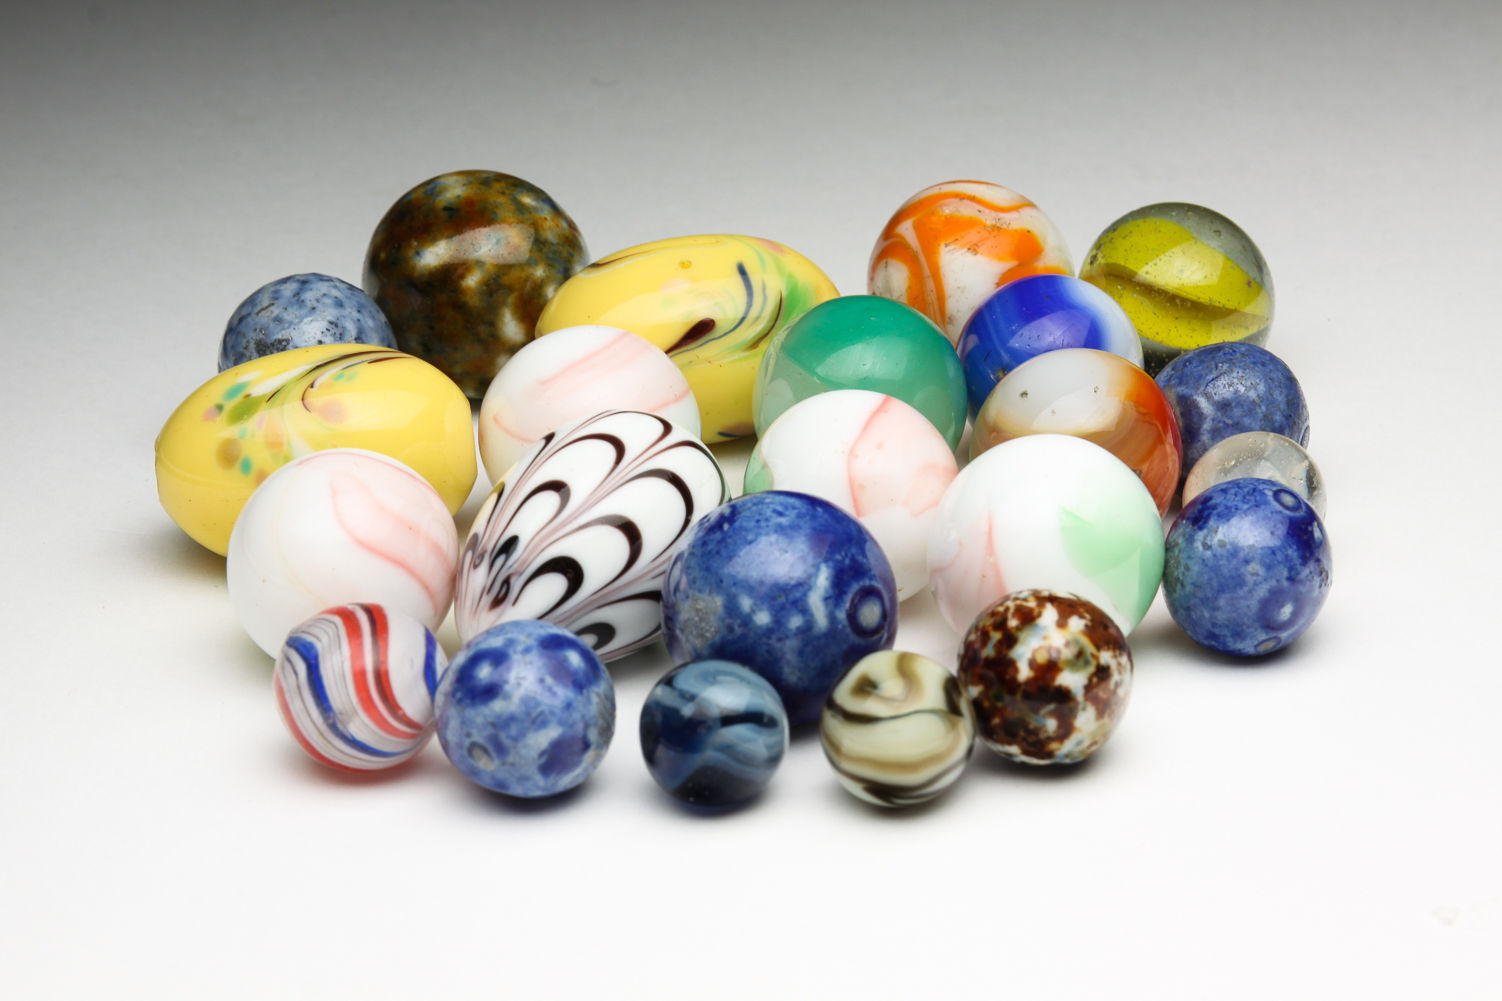 GROUP OF MARBLES AND BEADS. Twentieth